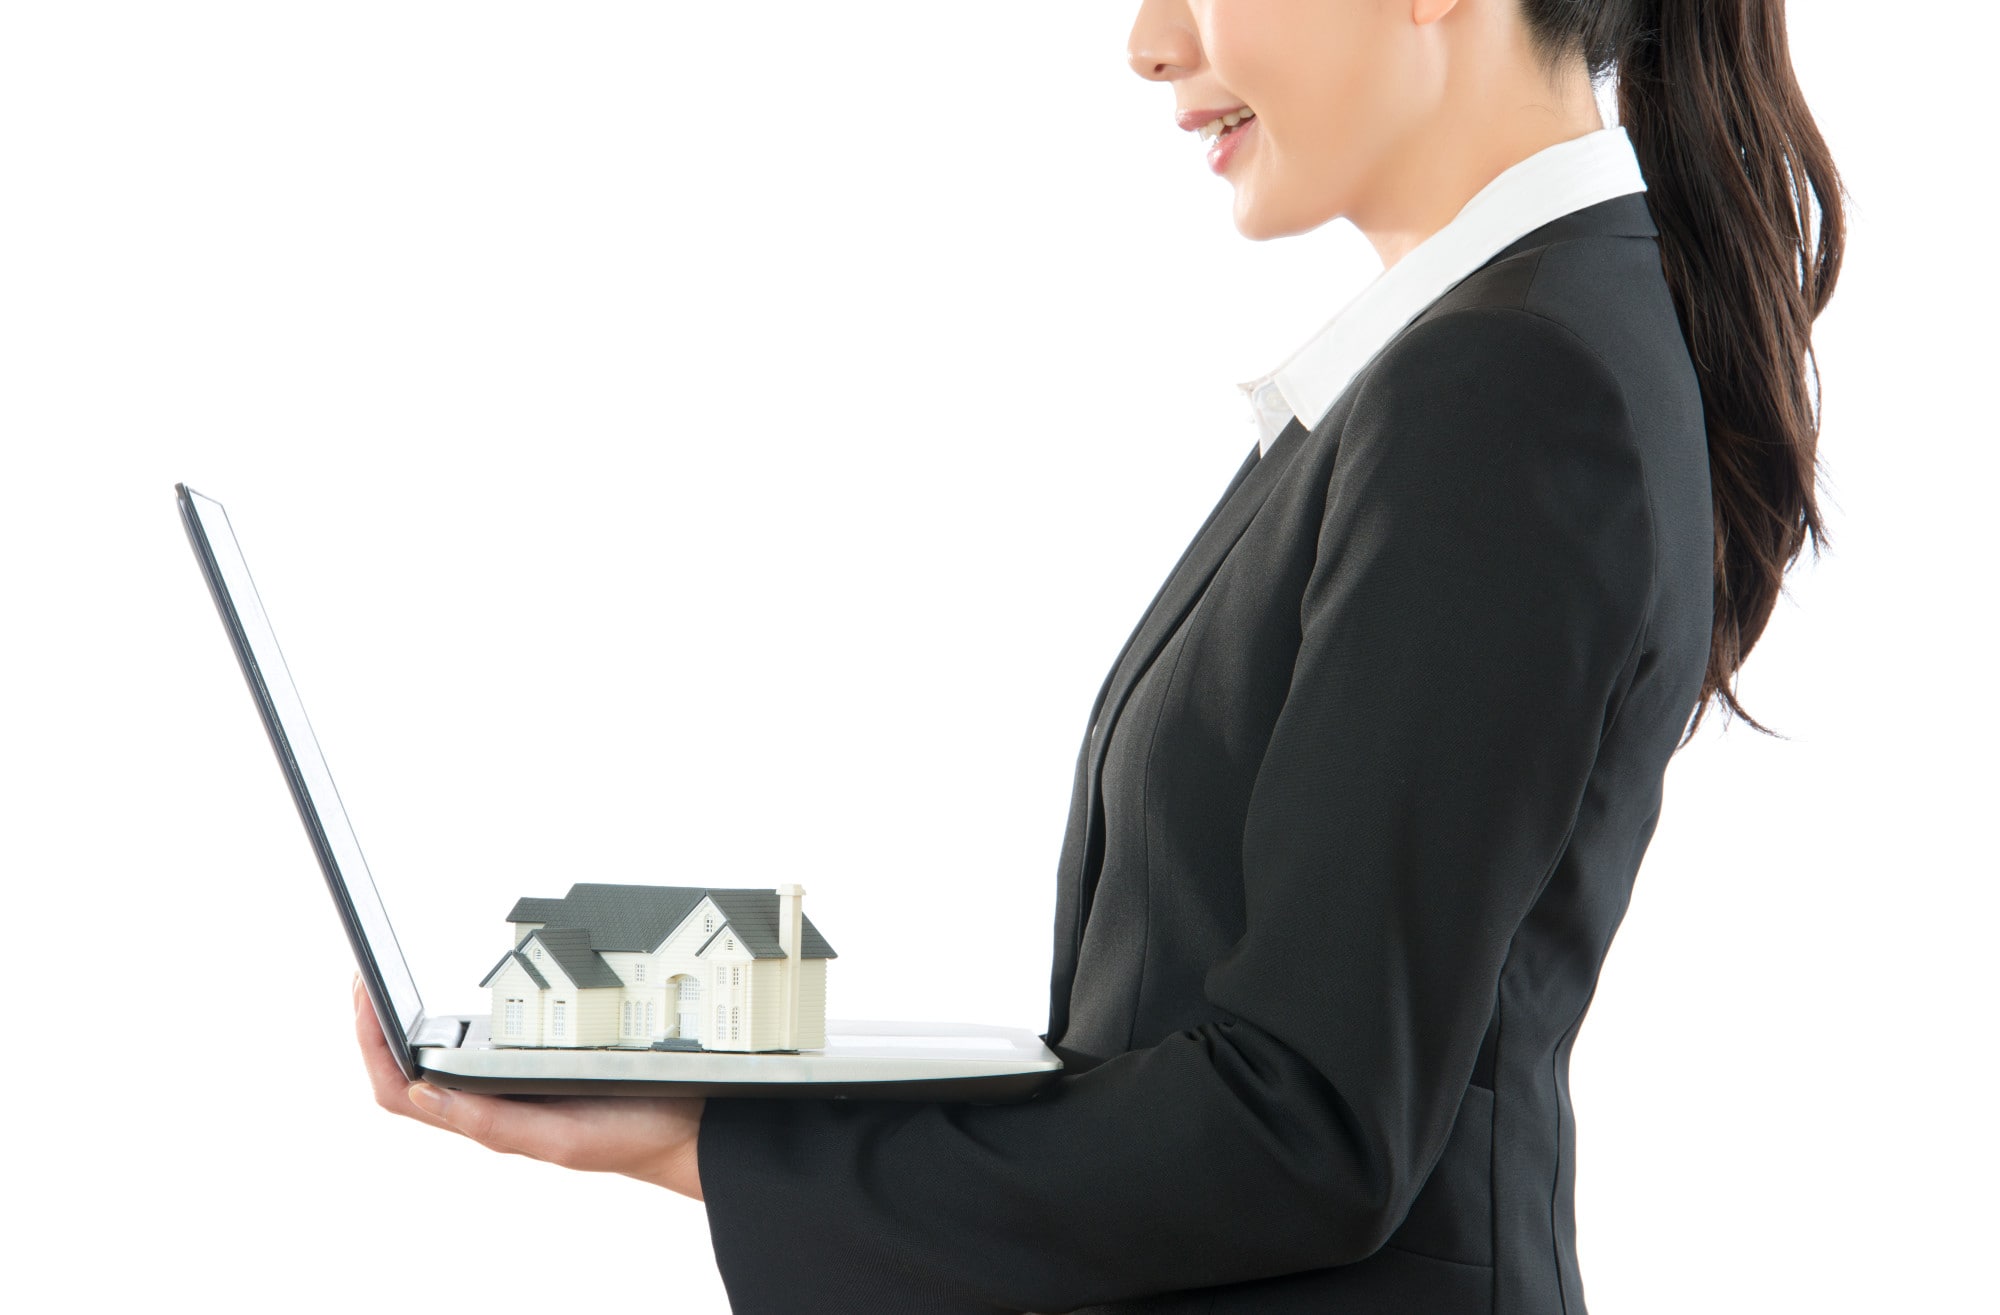 4 Tips for Choosing the Best Property Management Company